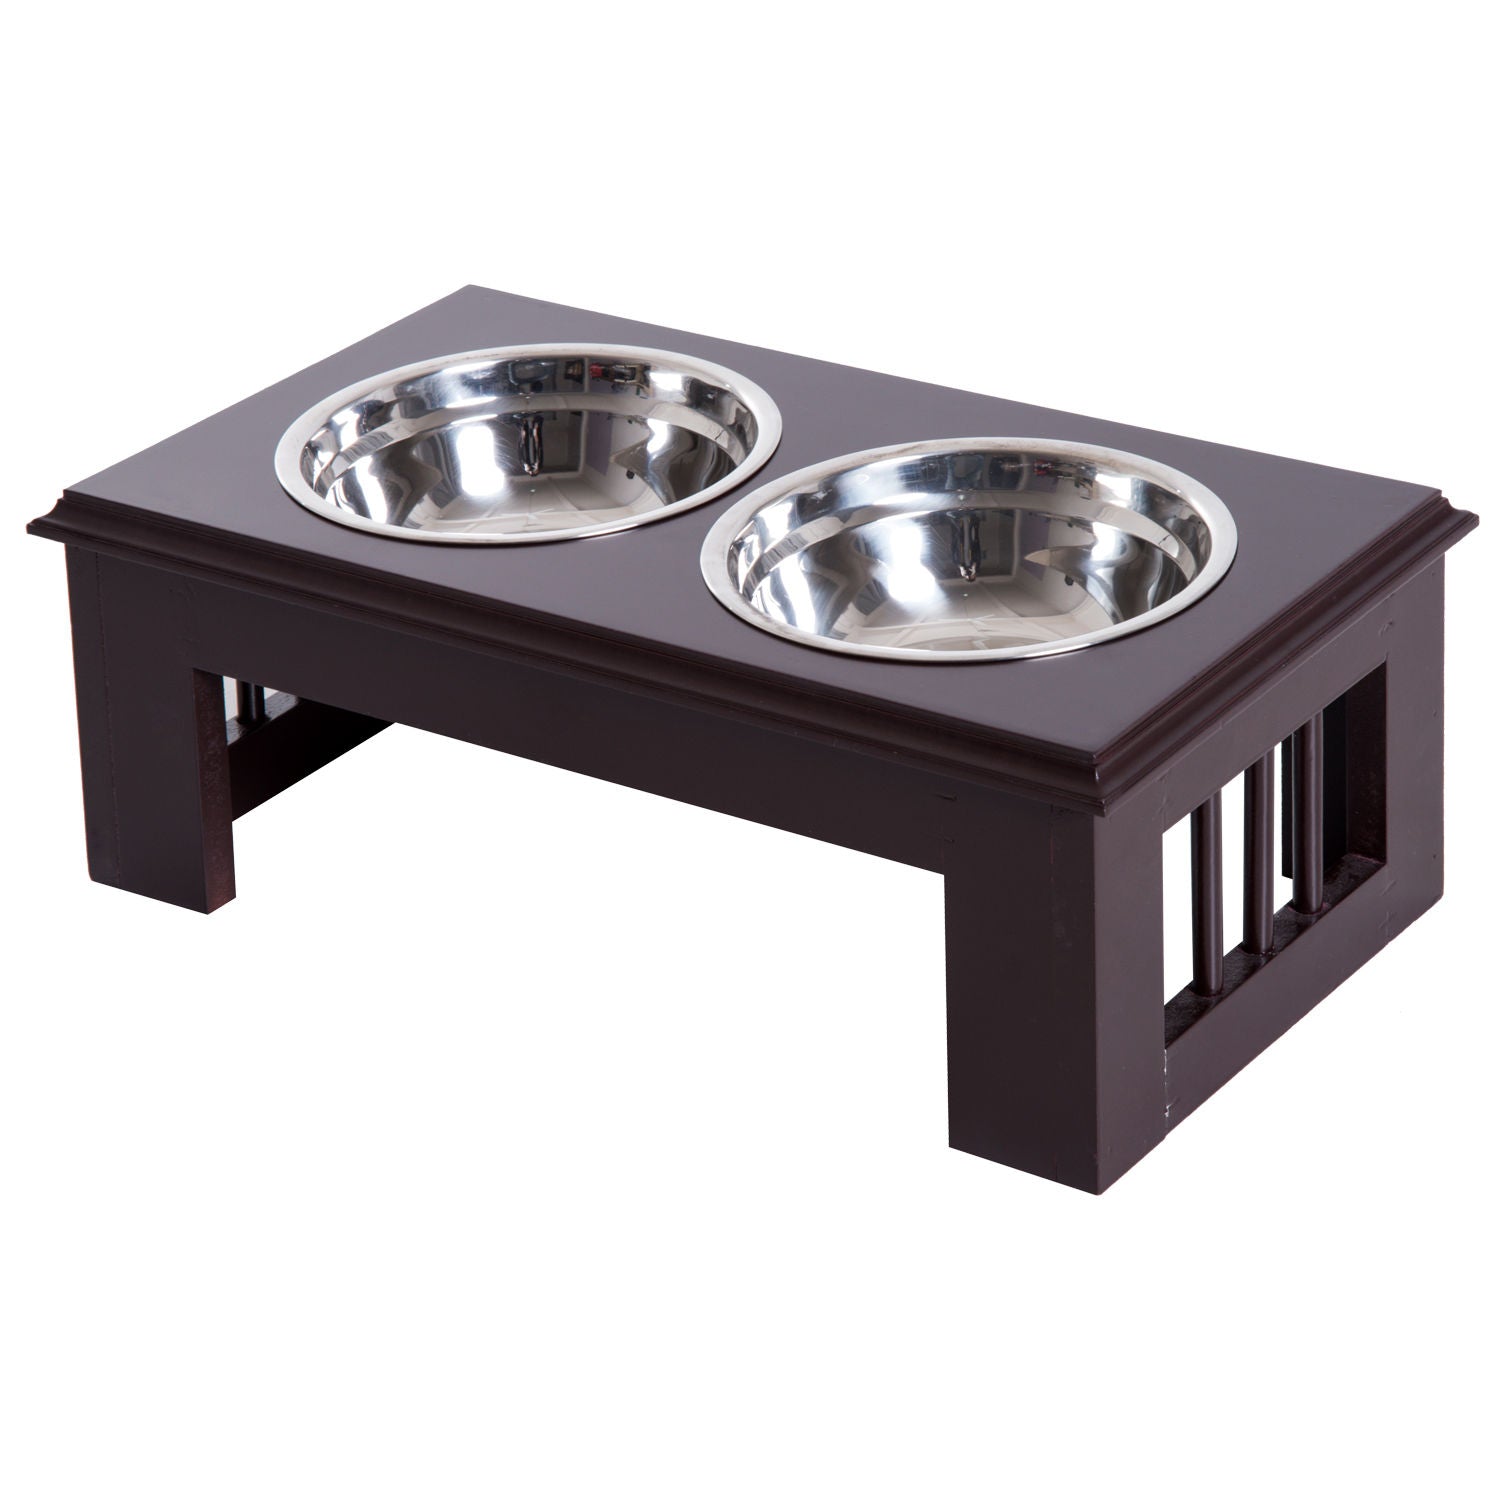 Nancy's Anne Lake Dog Bowl, 2 bowls, food bowl, raised cat food bowl, easy to maintain, stainless steel MDF